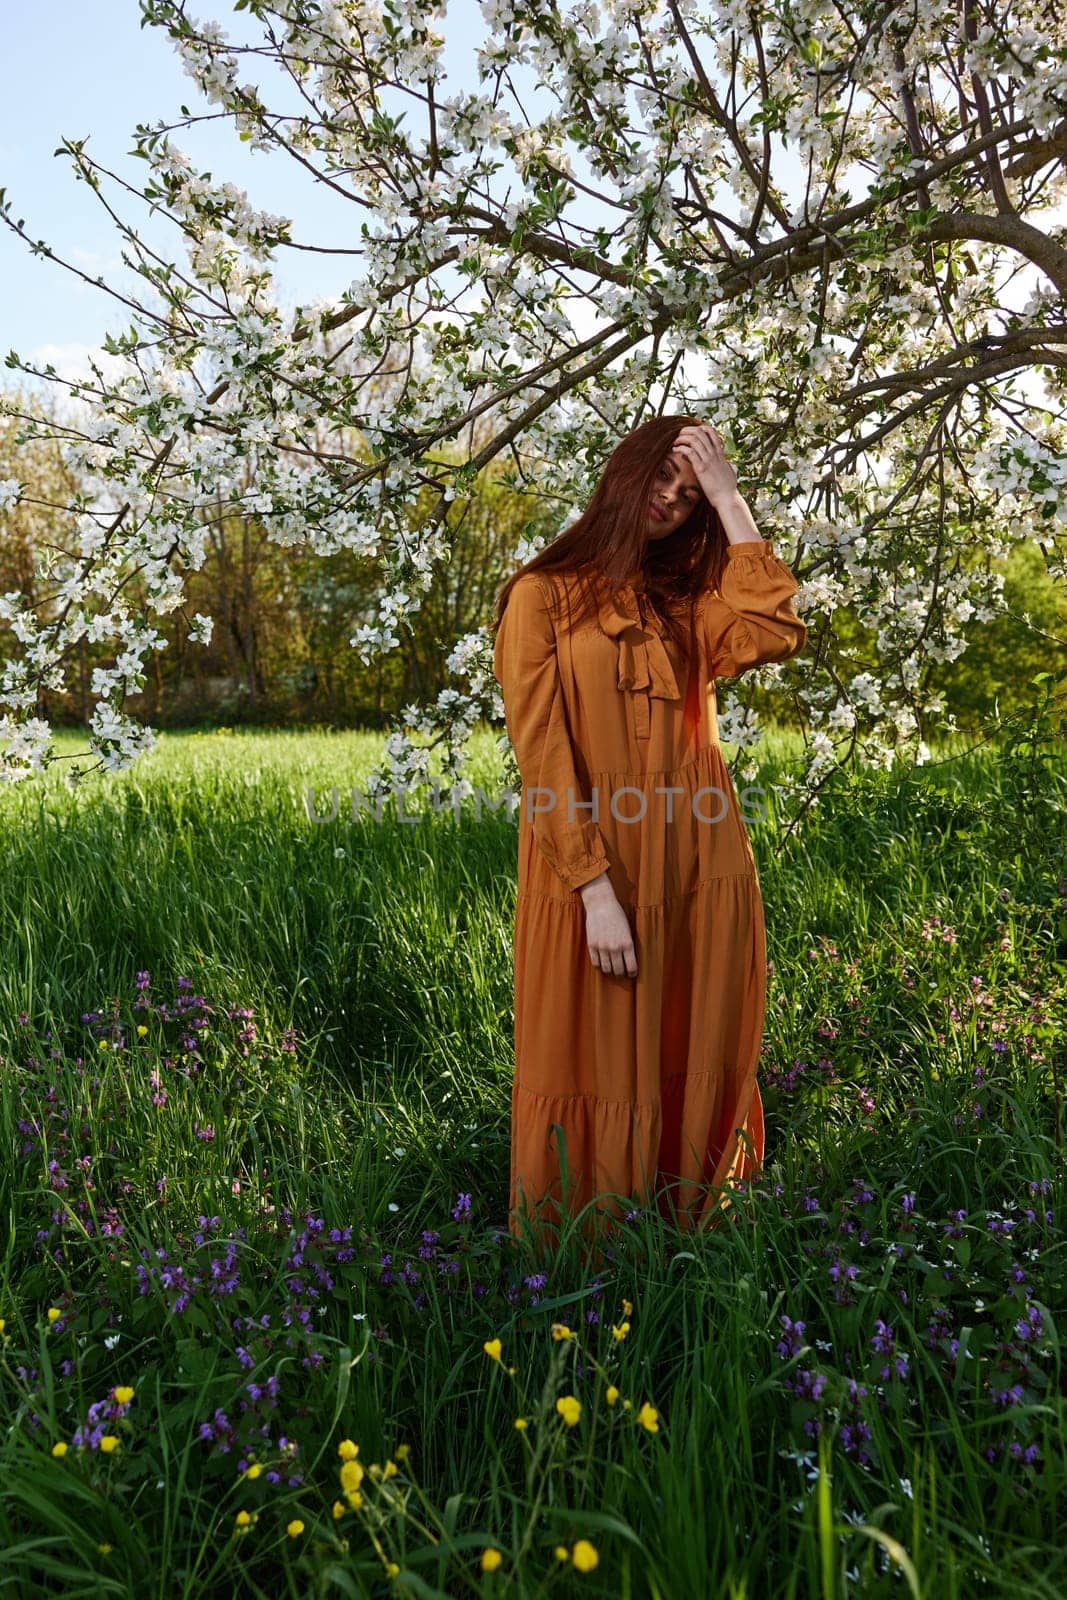 a happy, modest woman stands in an orange dress near a flowering tree and enjoys nature and a sunny summer day. High quality photo